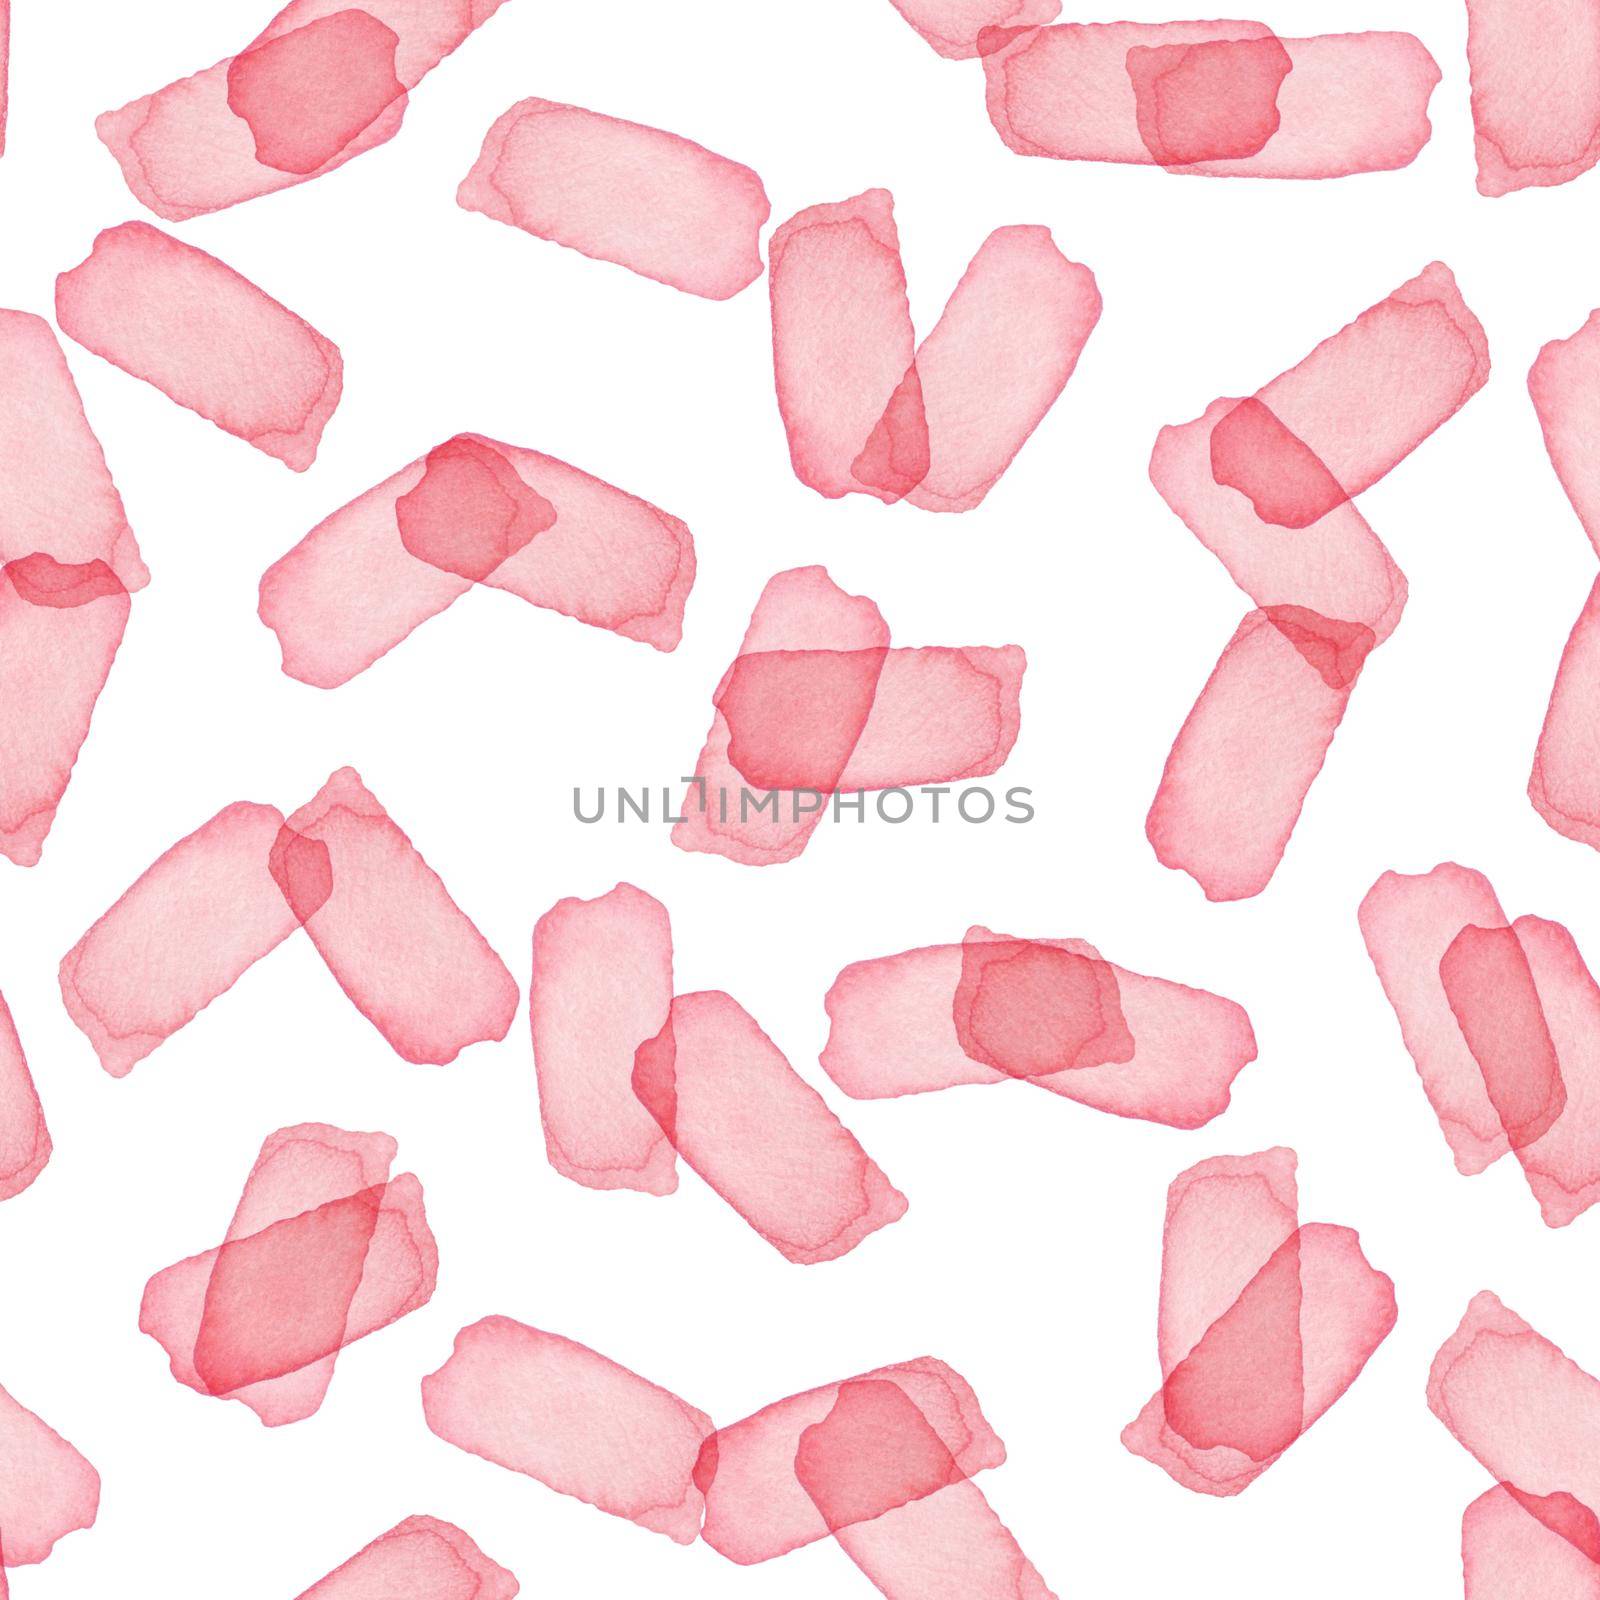 Hand Painted Brush Stroke Seamless Watercolor Pattern. Abstract watercolour shapes in Pink Girly Color. Artistic Design for Fabric and Background by DesignAB